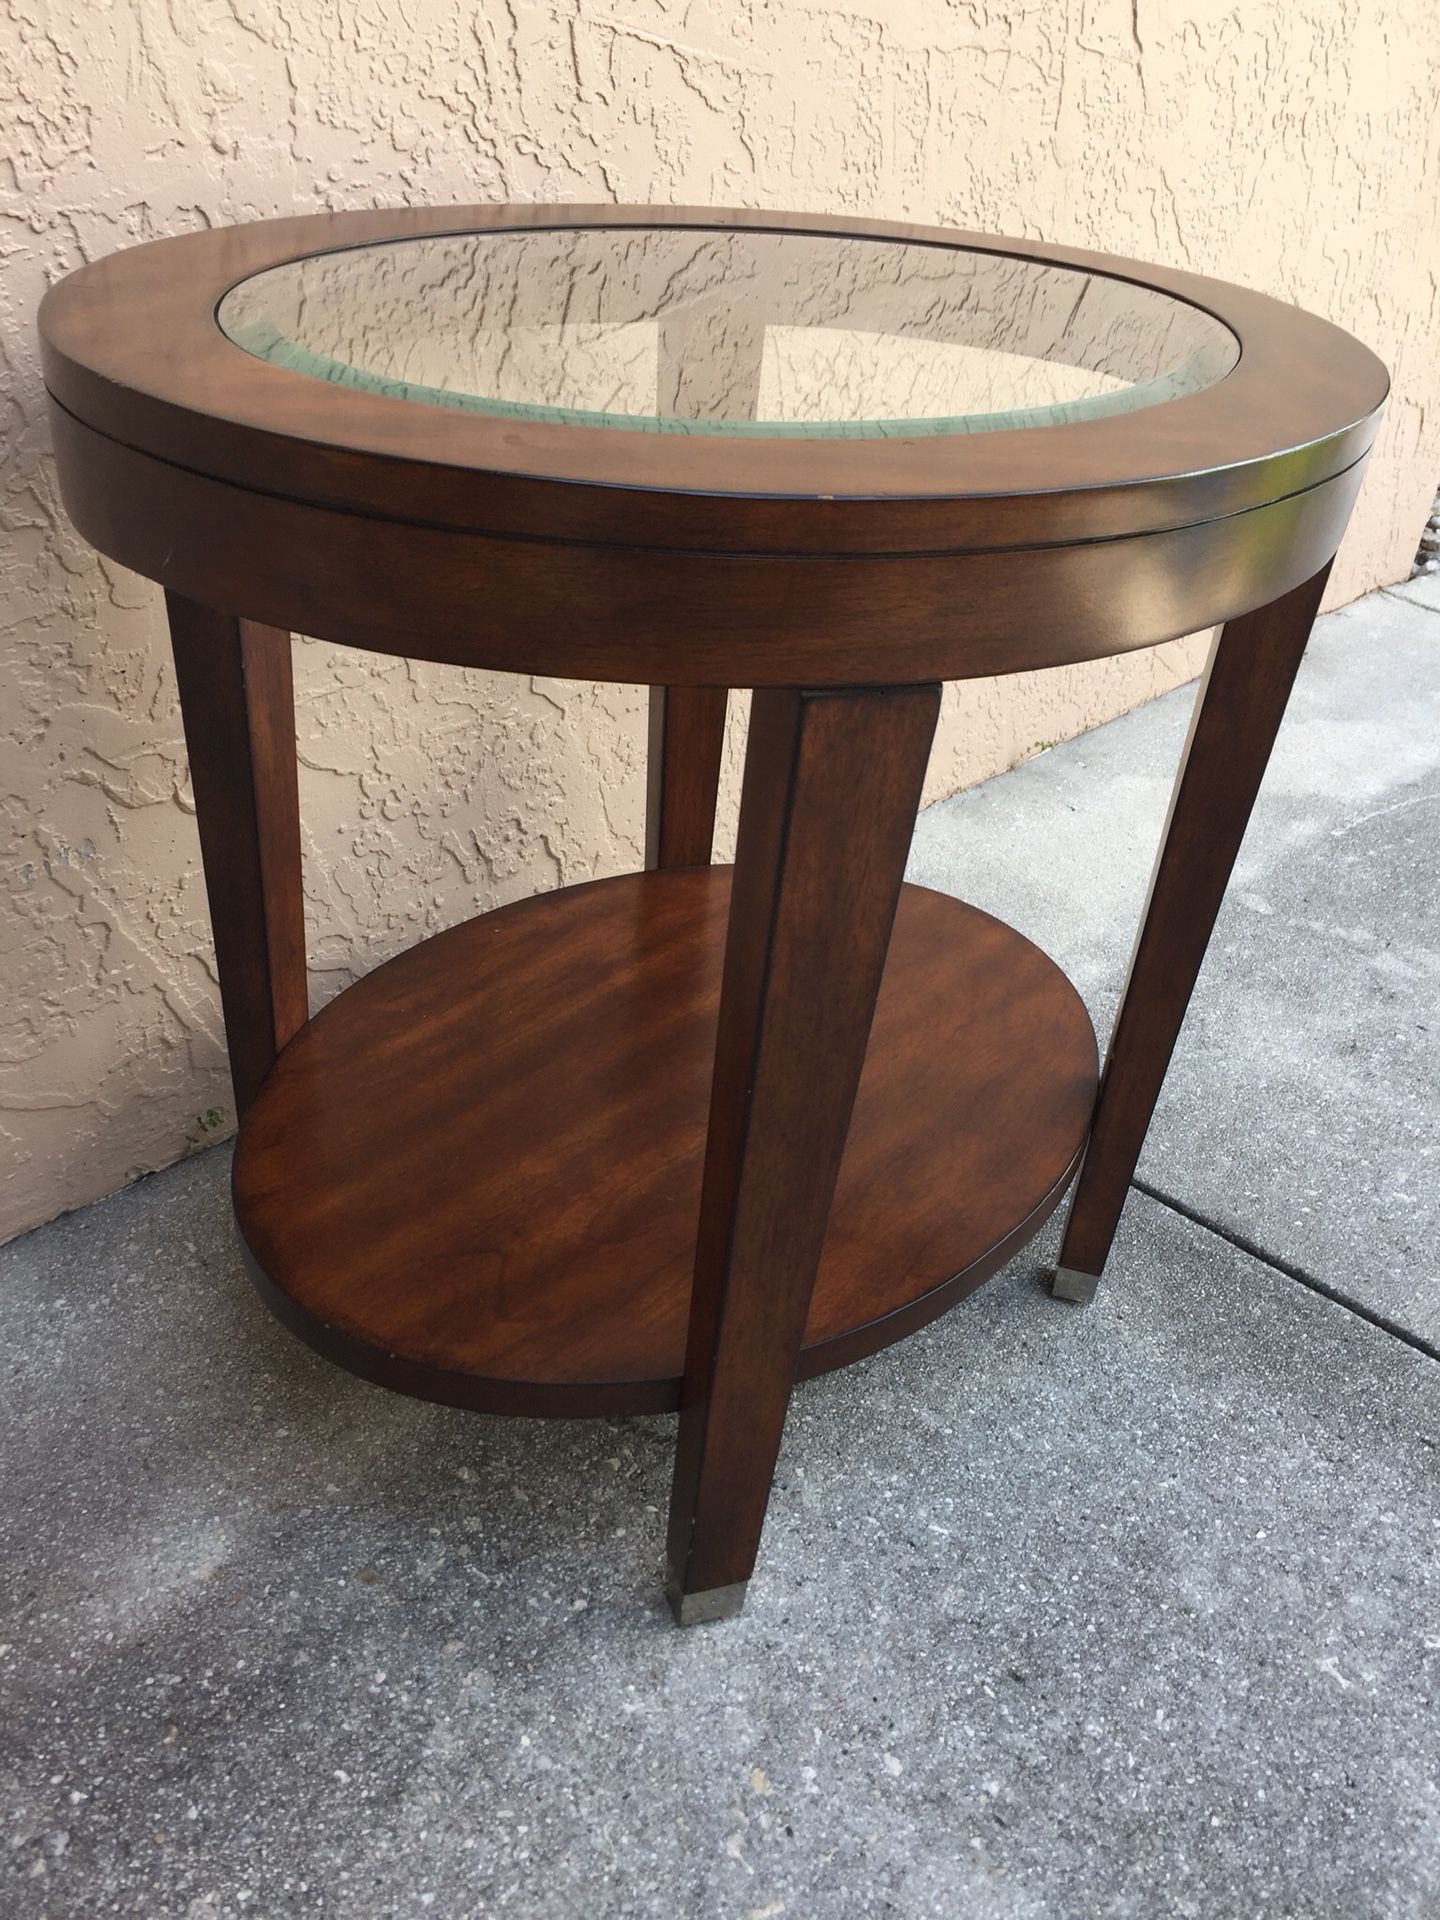 Oval side end table 27.75x21.75 height 24.5 (1)